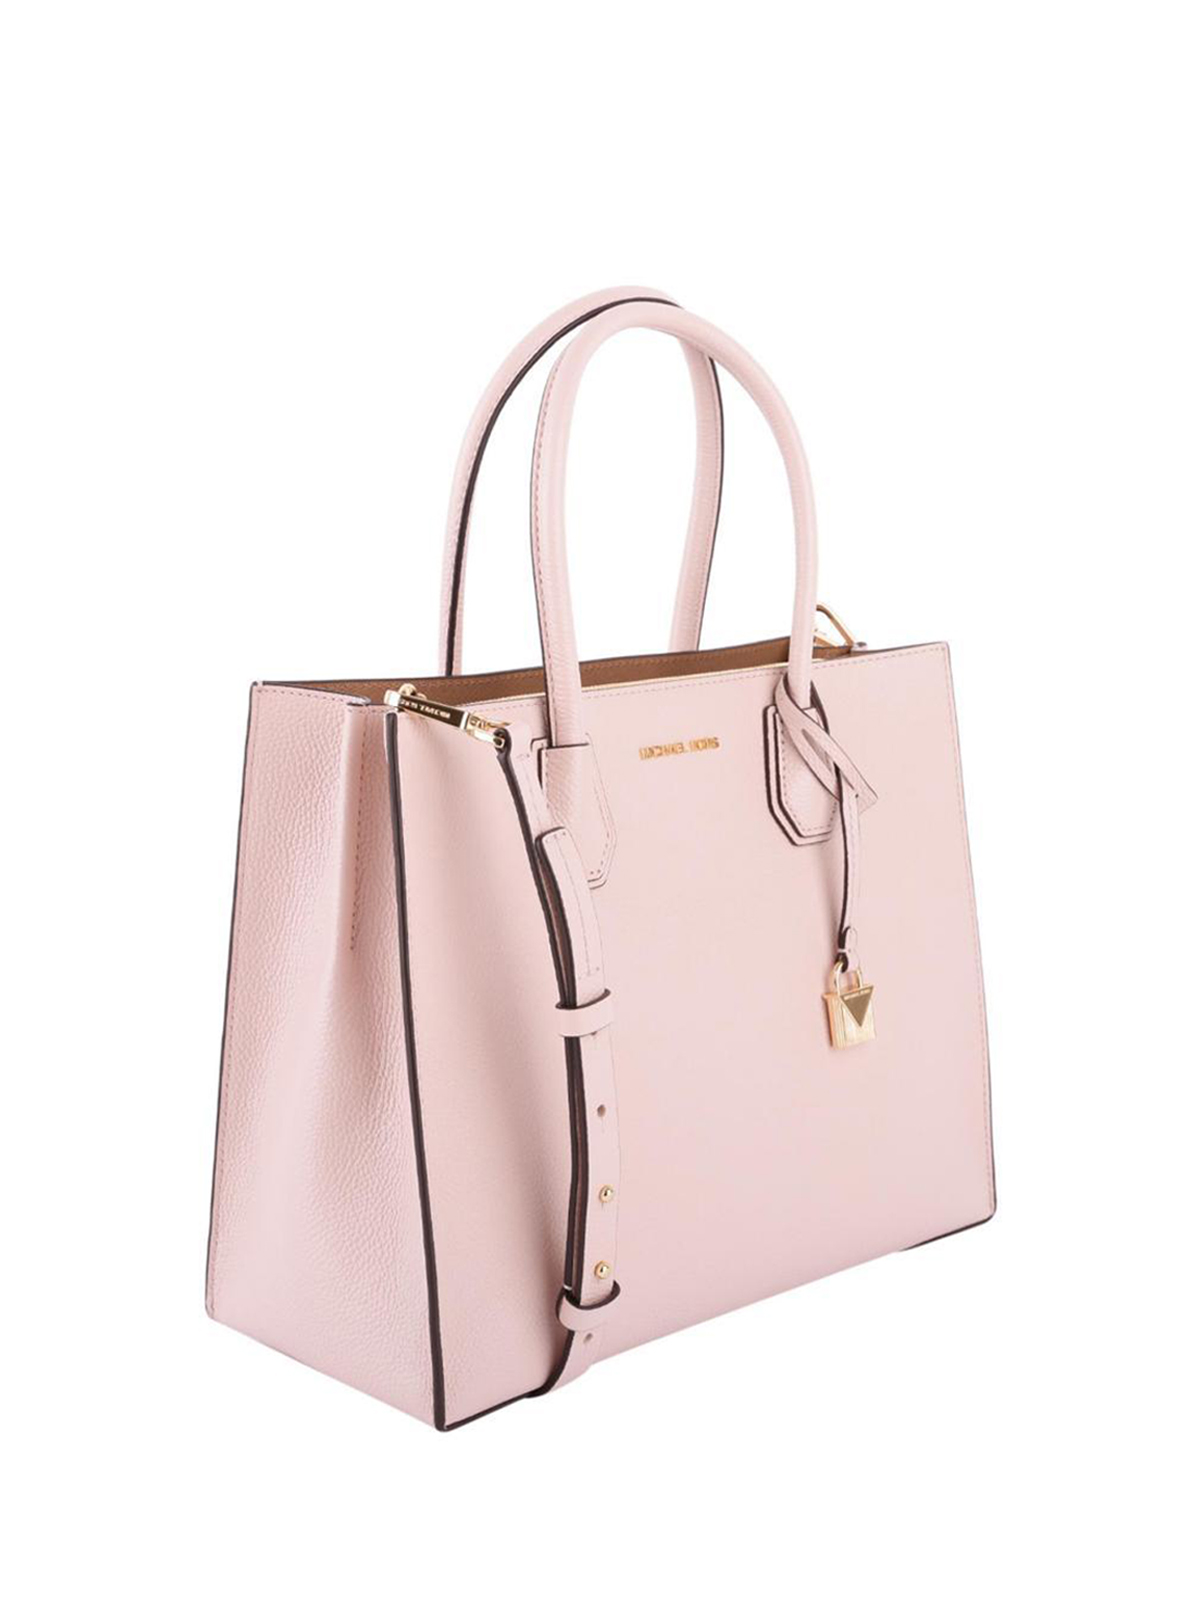 Michael Kors - Mercer large soft pink leather tote - totes bags - 30F6GM9T3L187